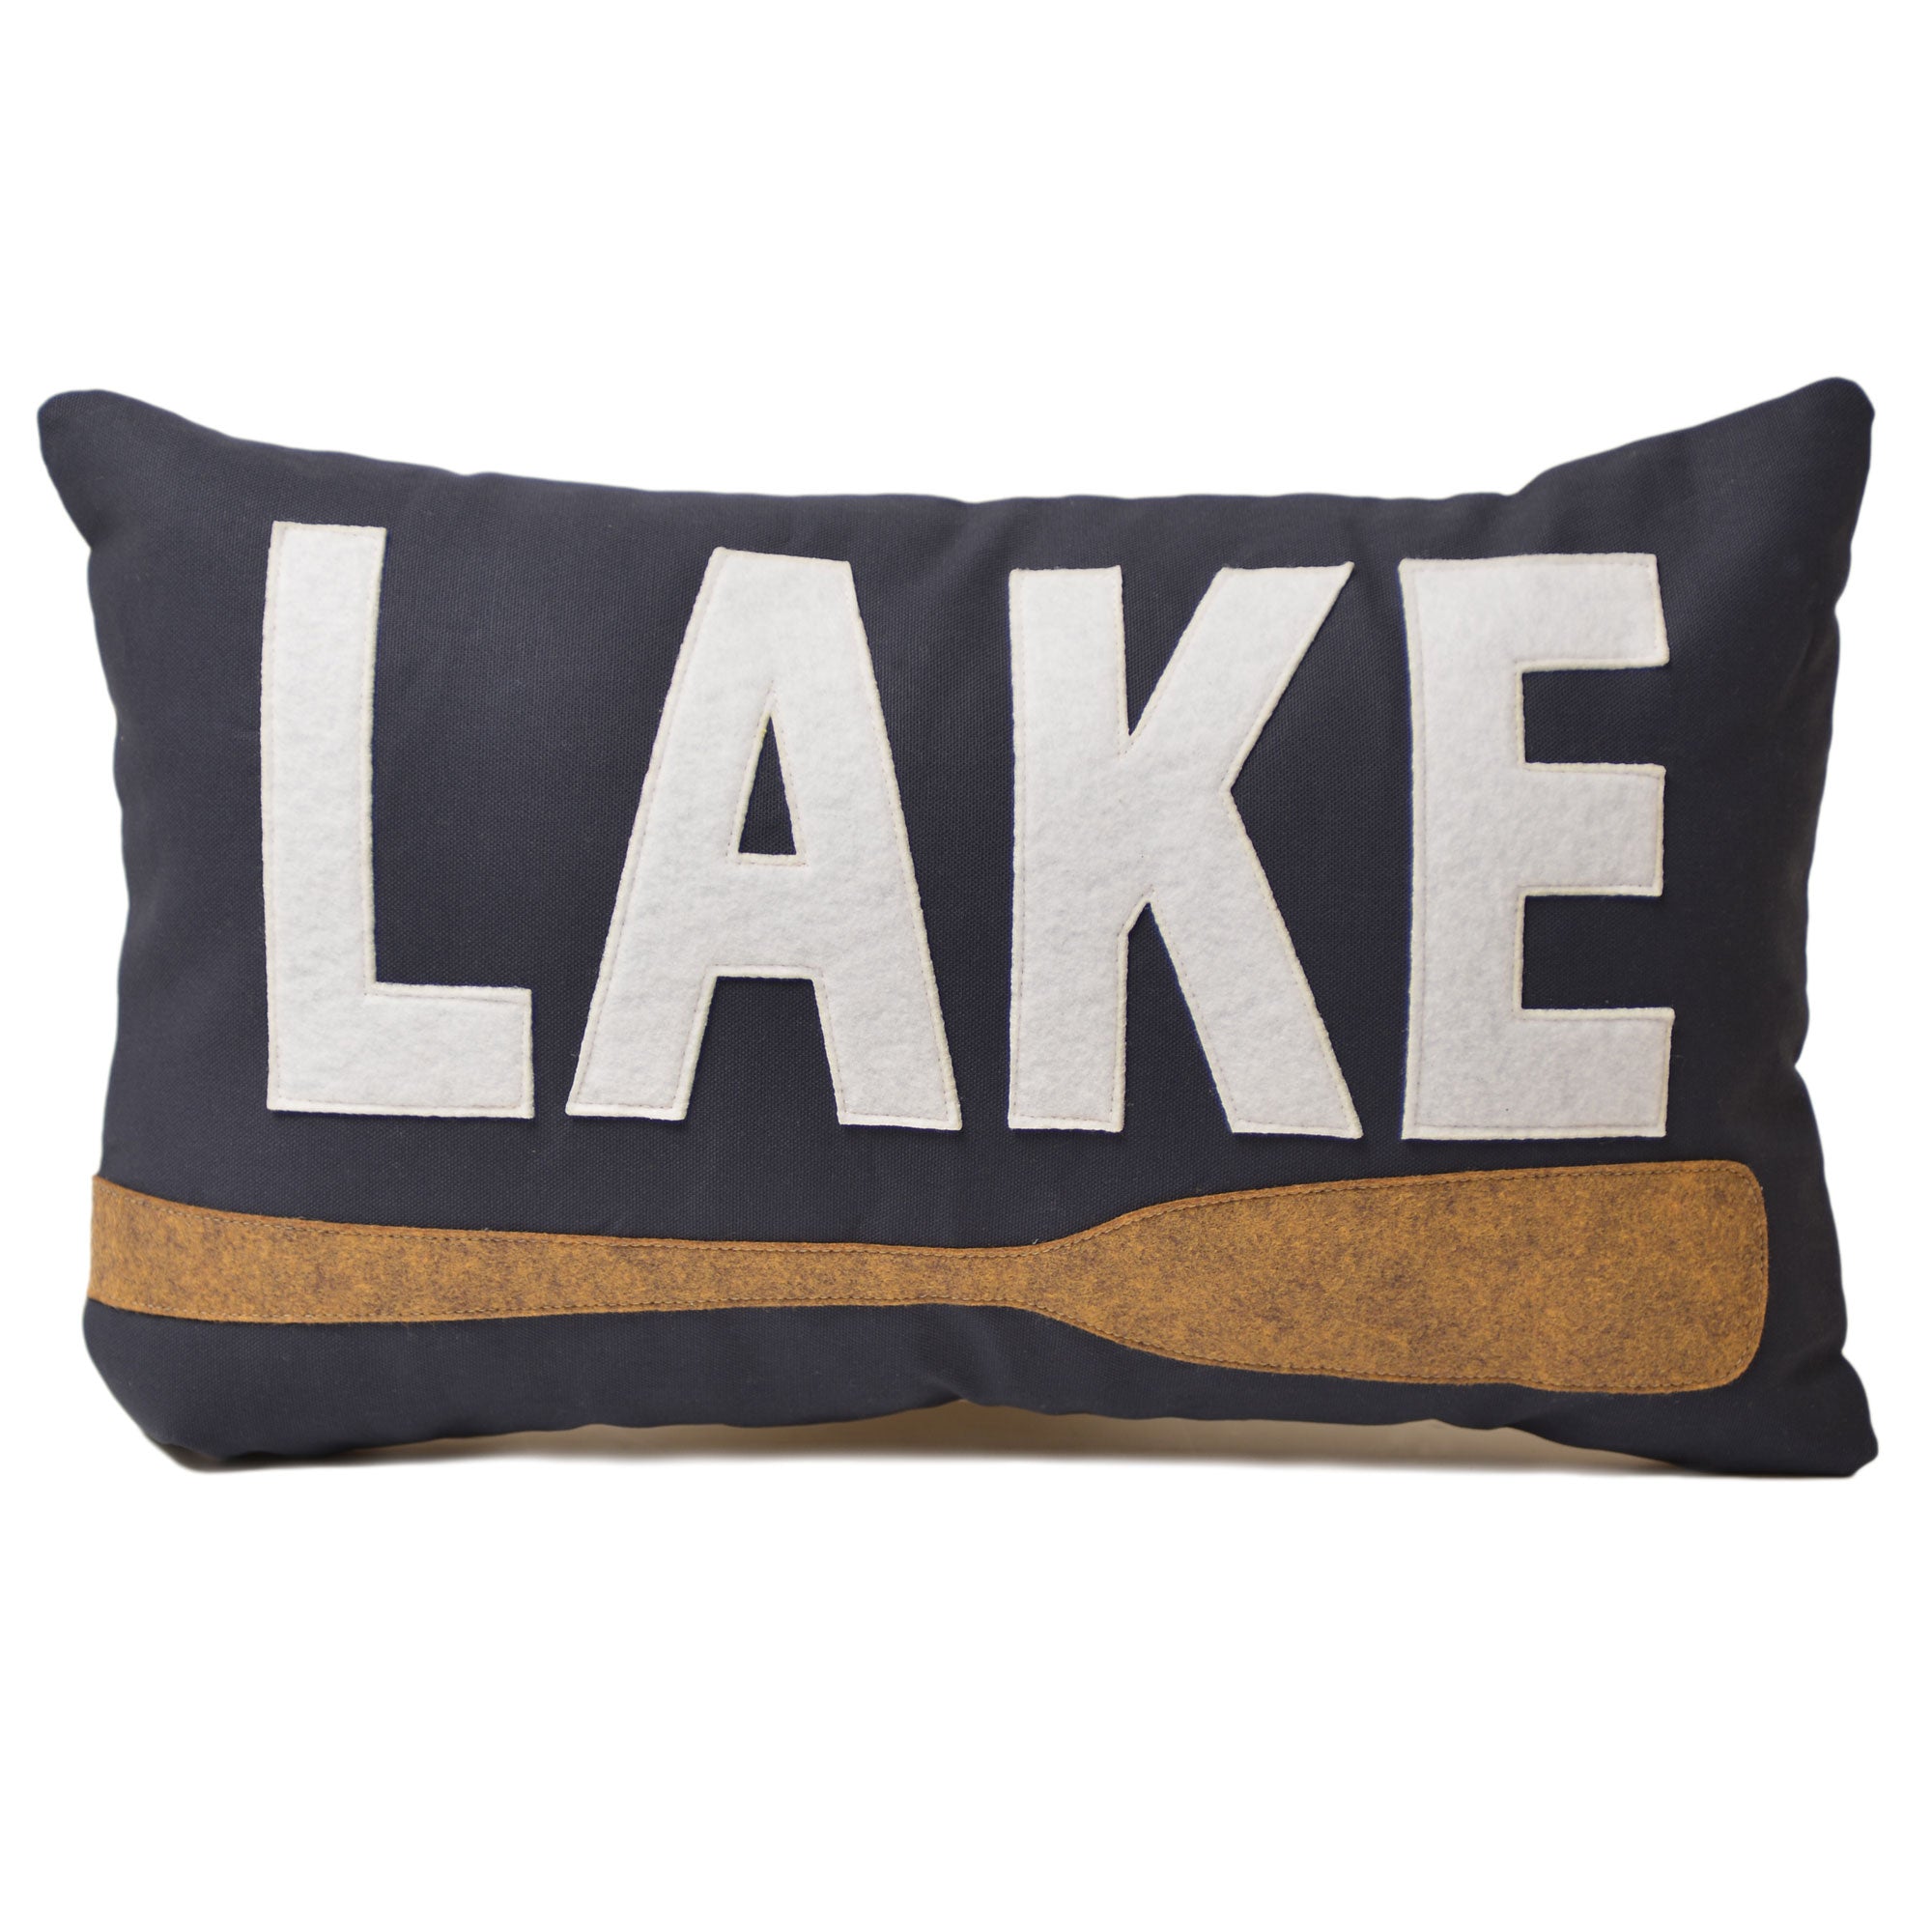 14x21" LAKE lumbar pillow with oars, on navy